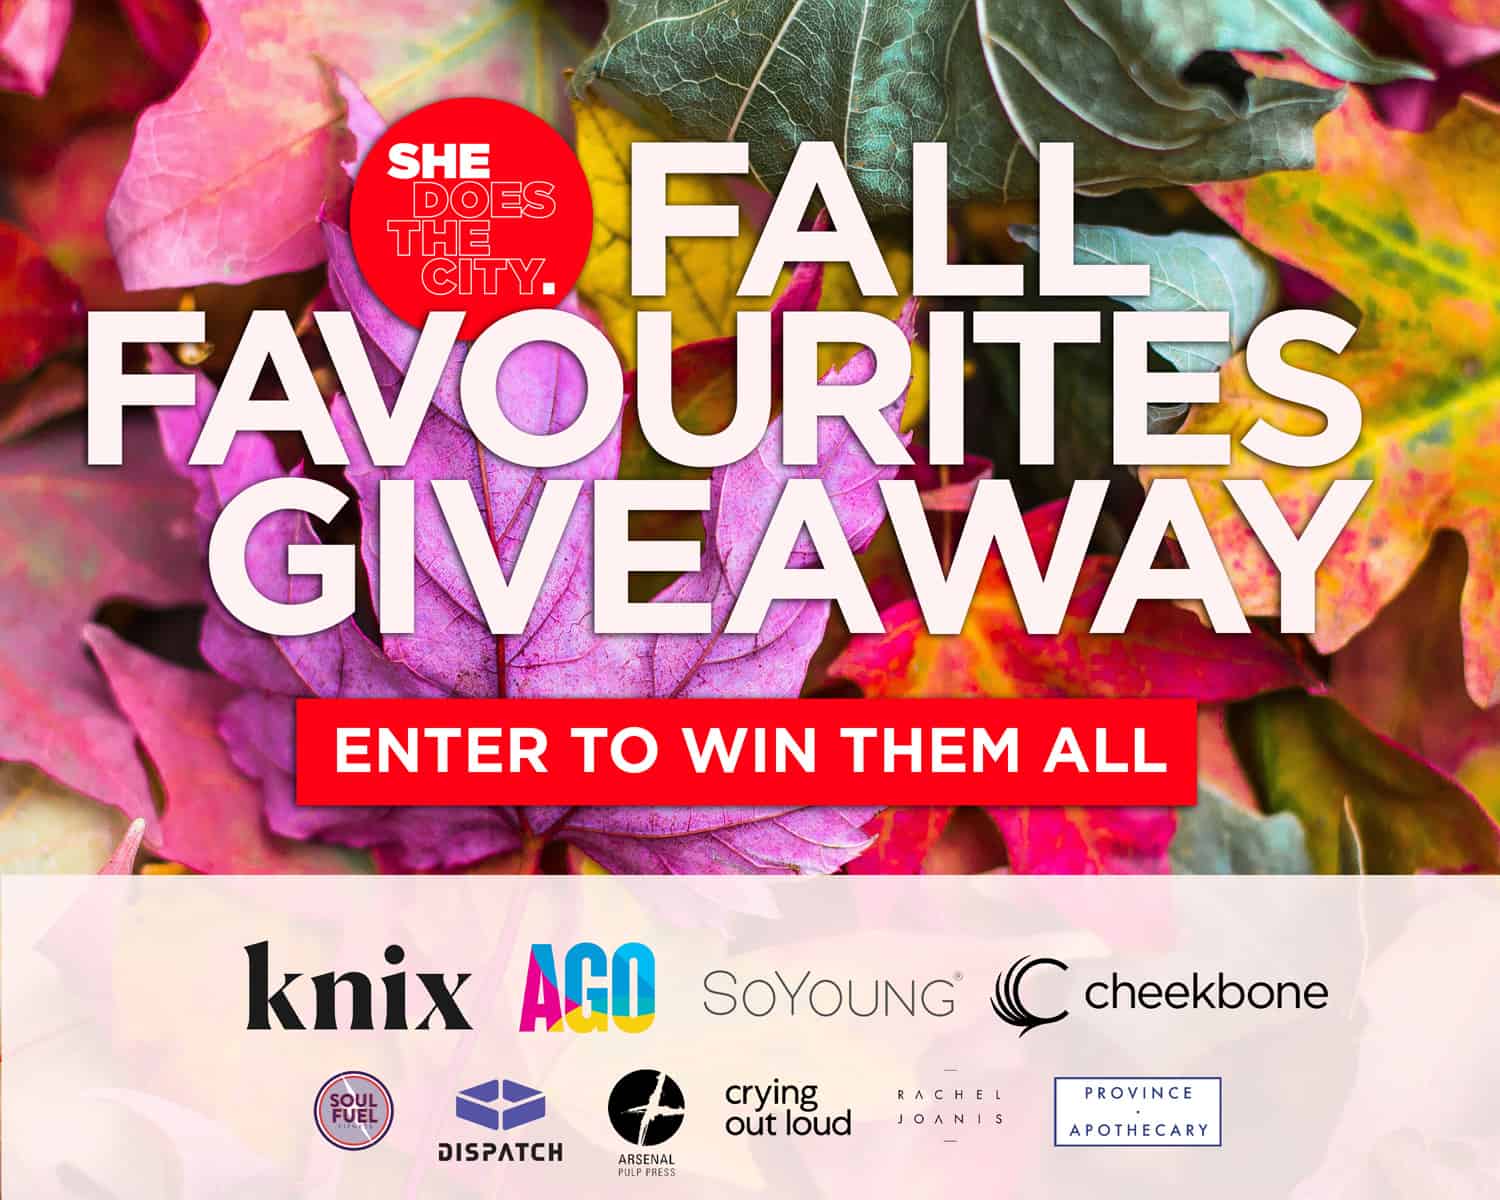 We brought together 10 brands we love for one incredible fall giveaway!